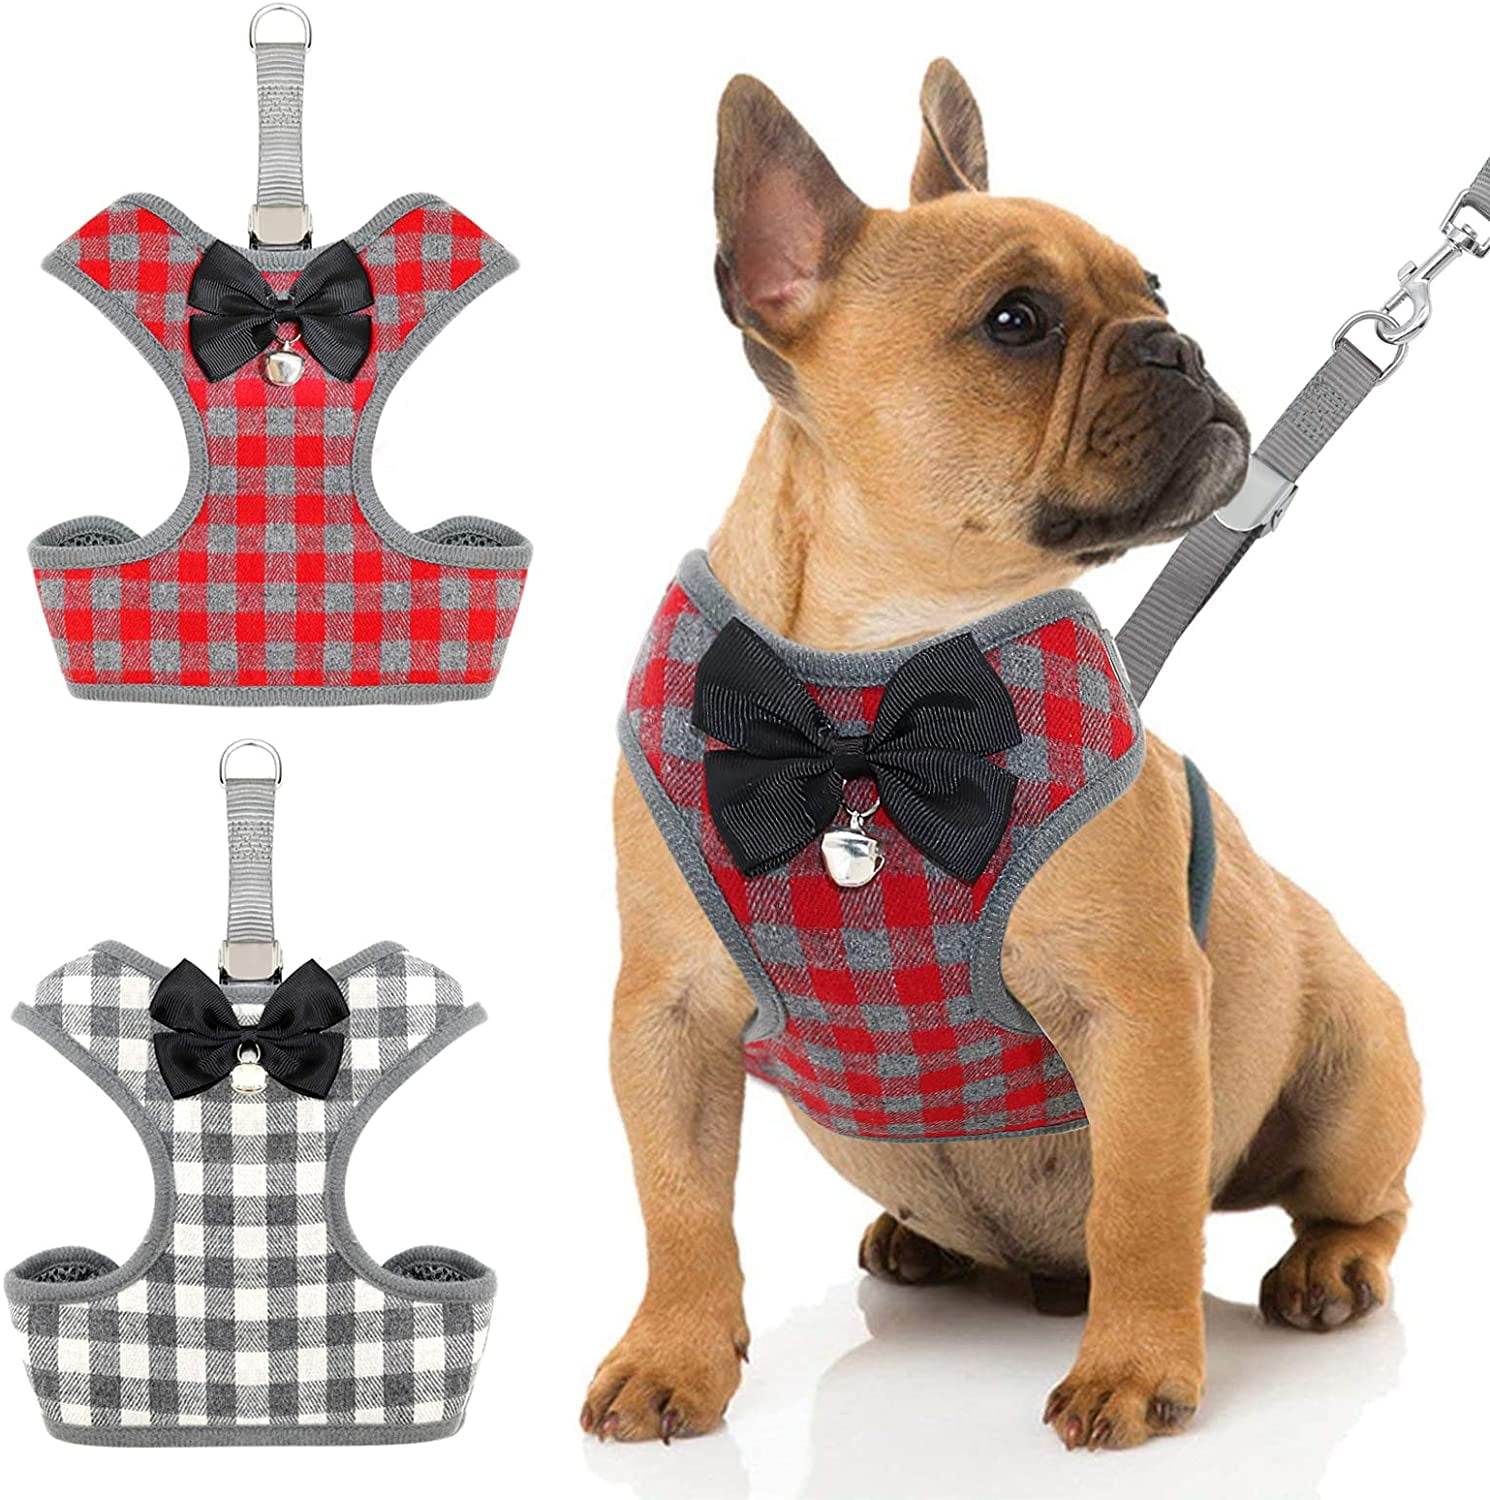 S M Dog Harness with Flower or Bow Tie Red Tartan Pet Harness Sizes XS 